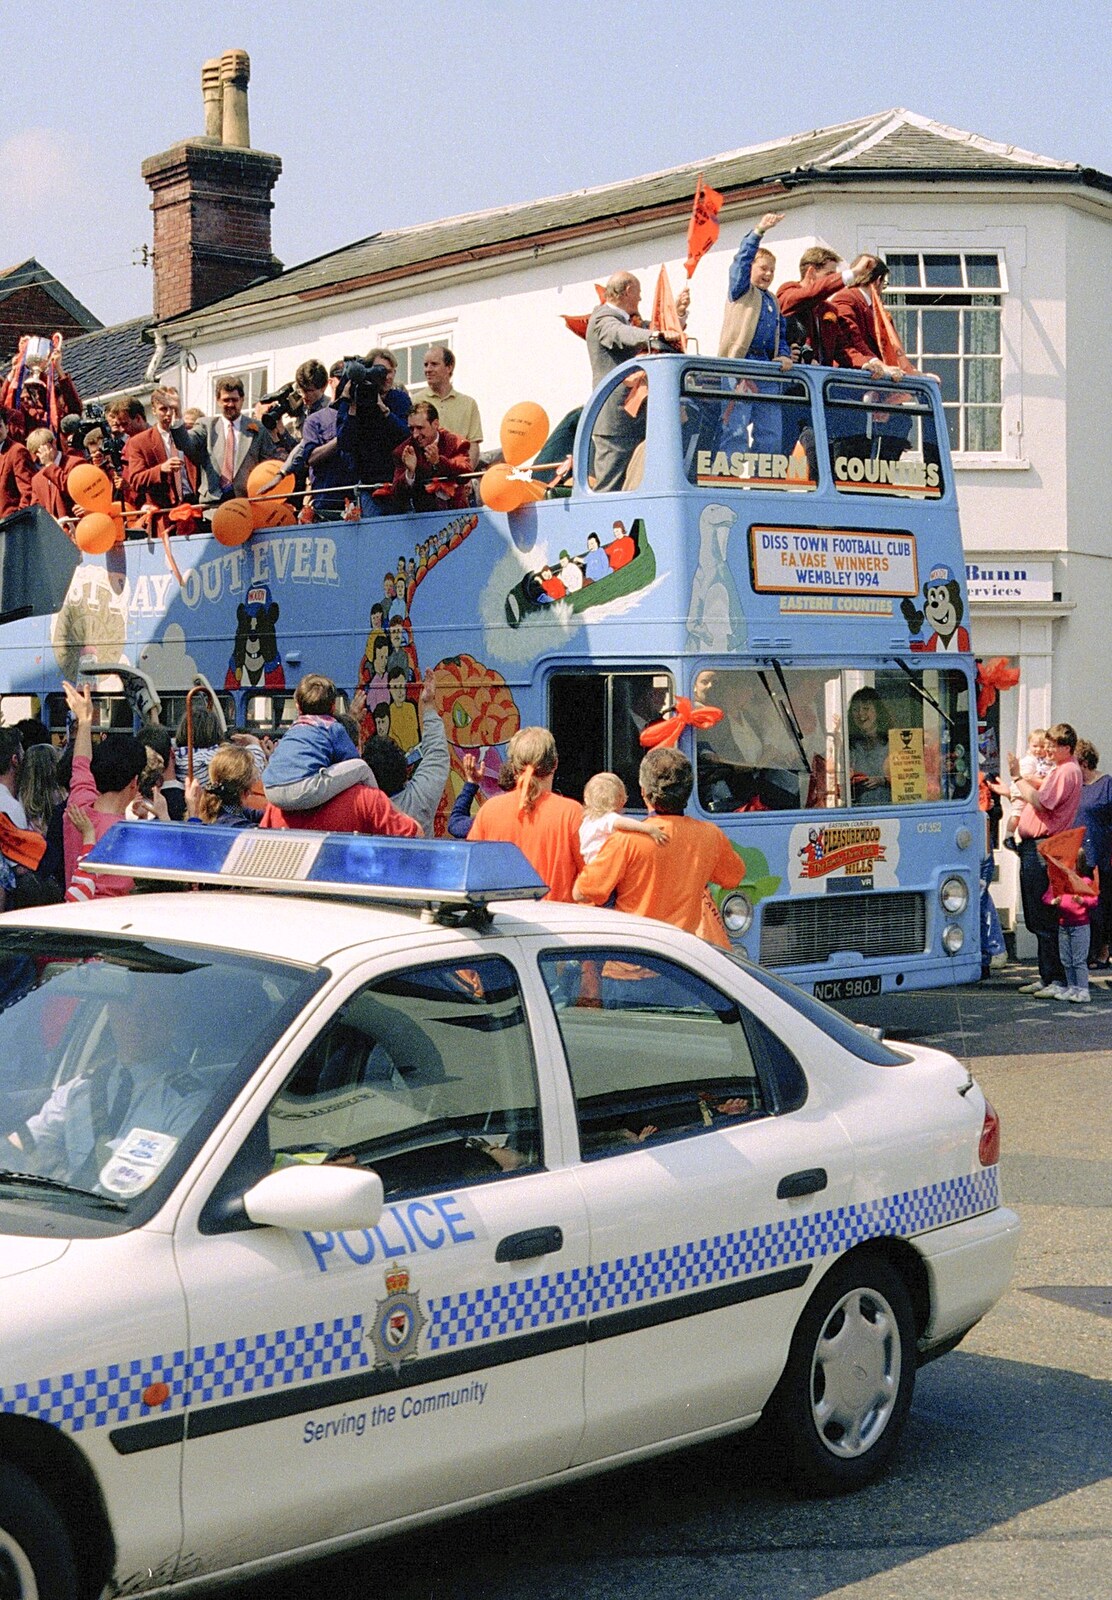 The bus comes out of Roydon Road from Diss Town and the F.A. Vase Final, Diss and Wembley, Norfolk and London - 15th May 1994